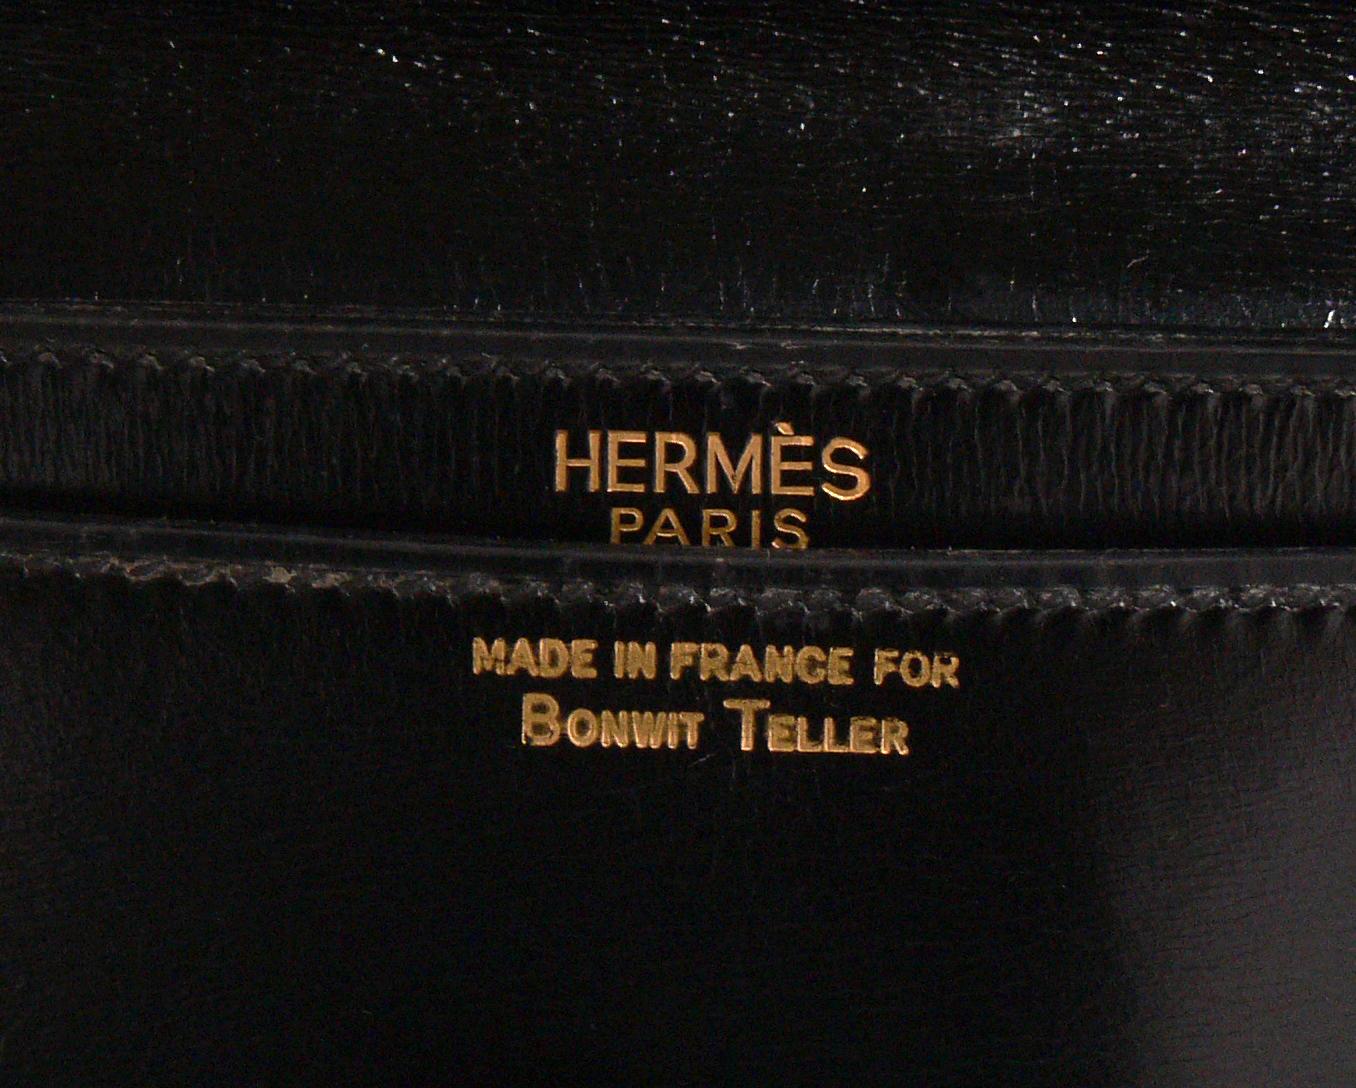 Original Hermès 'Sac à Dépêches' briefcase, made in France for Bonwit Teller, circa 1980s. Sliding locker fastener on flap with three interior pockets, includes original keys. Perfect size for a laptop or iPad. Professionally cleaned and